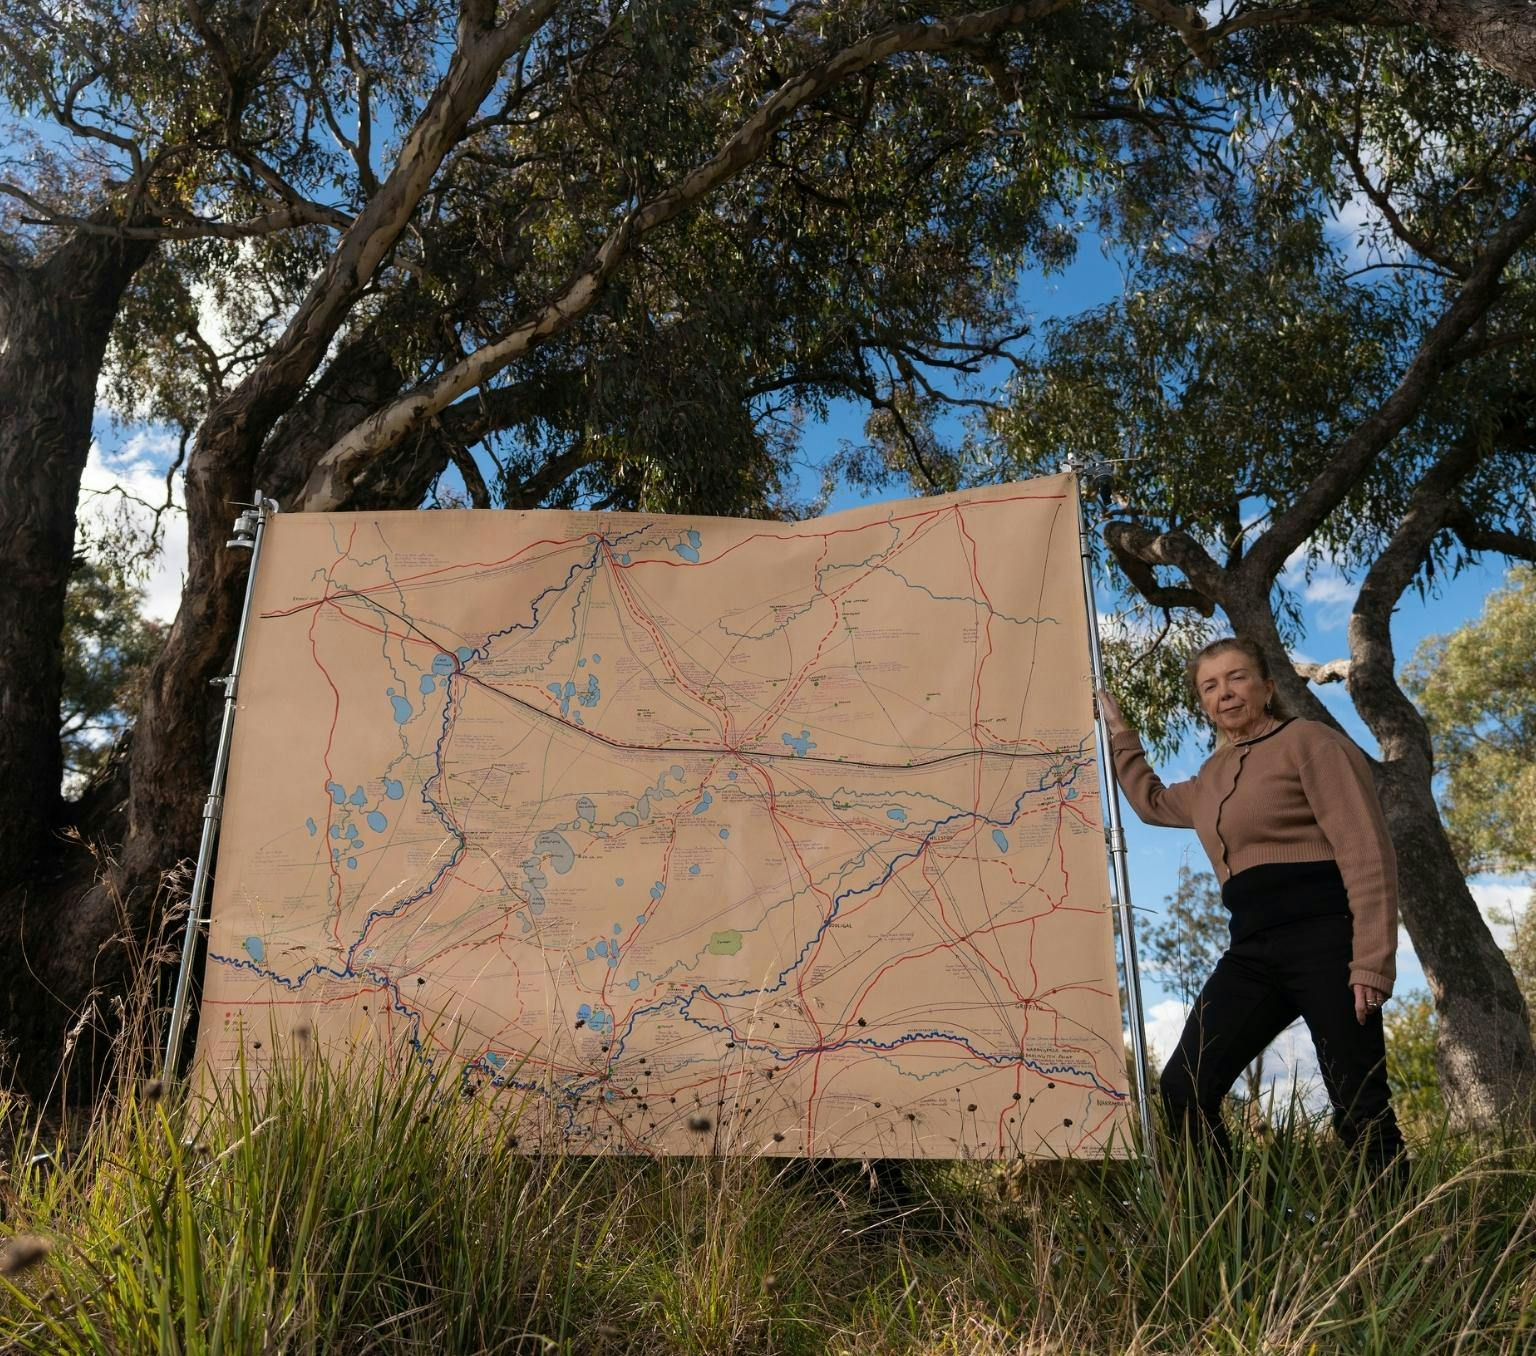 Ann is wearing a brown jumper and black pants. She is standing next to a large light brown map which is taller than her. She is outside, standing in grass with tall trees behind her